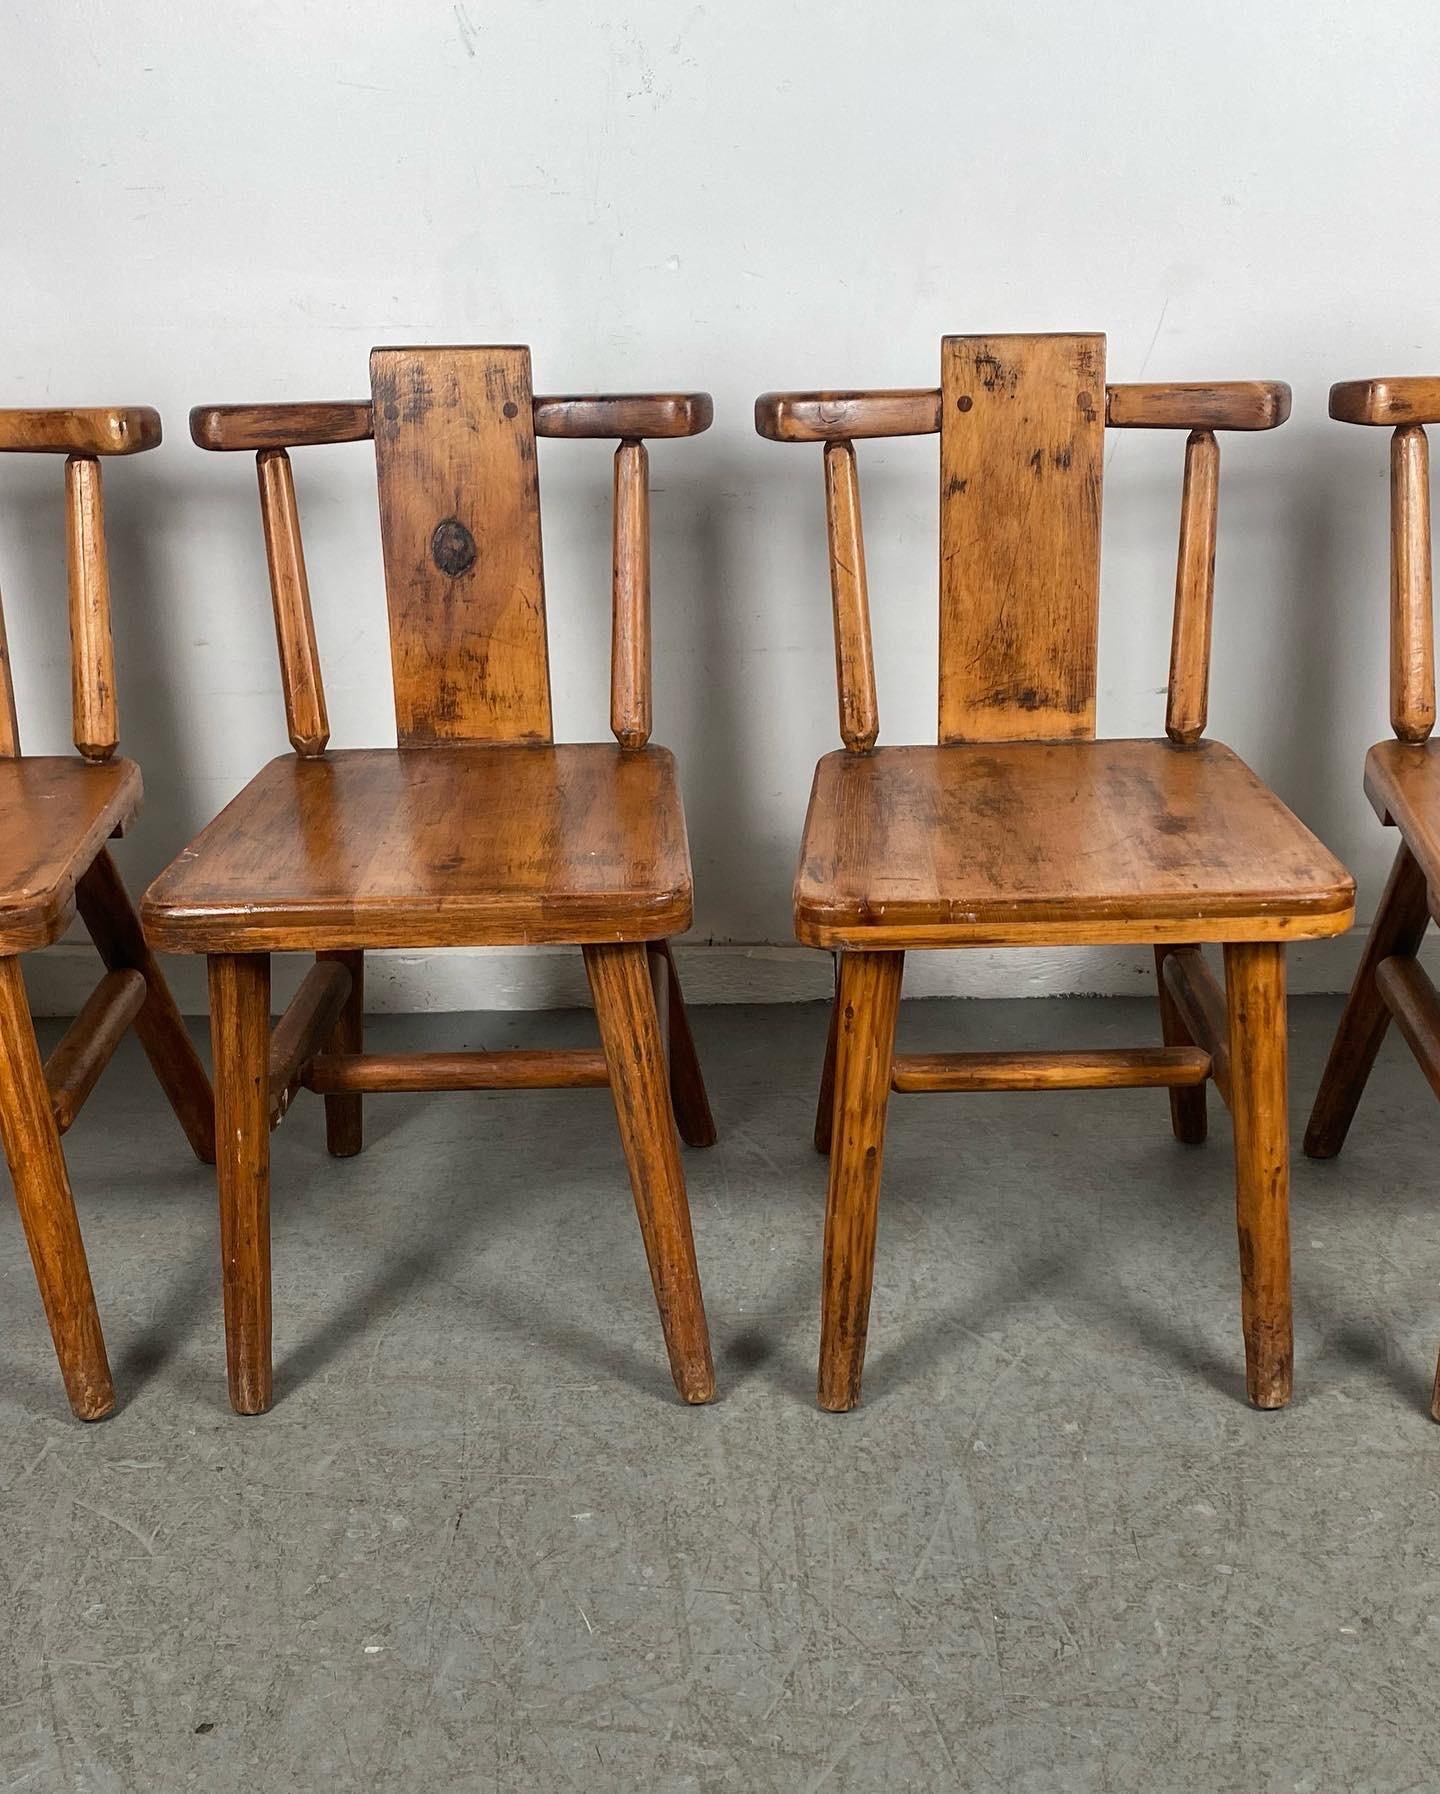 Modern Farmhouse cottage/ cabin solid wood side chairs by Sikes Chair Co., charming set, great style and design. Solid maple, pine? Hand delivery avail to New York City or anywhere en route from Buffalo NY.